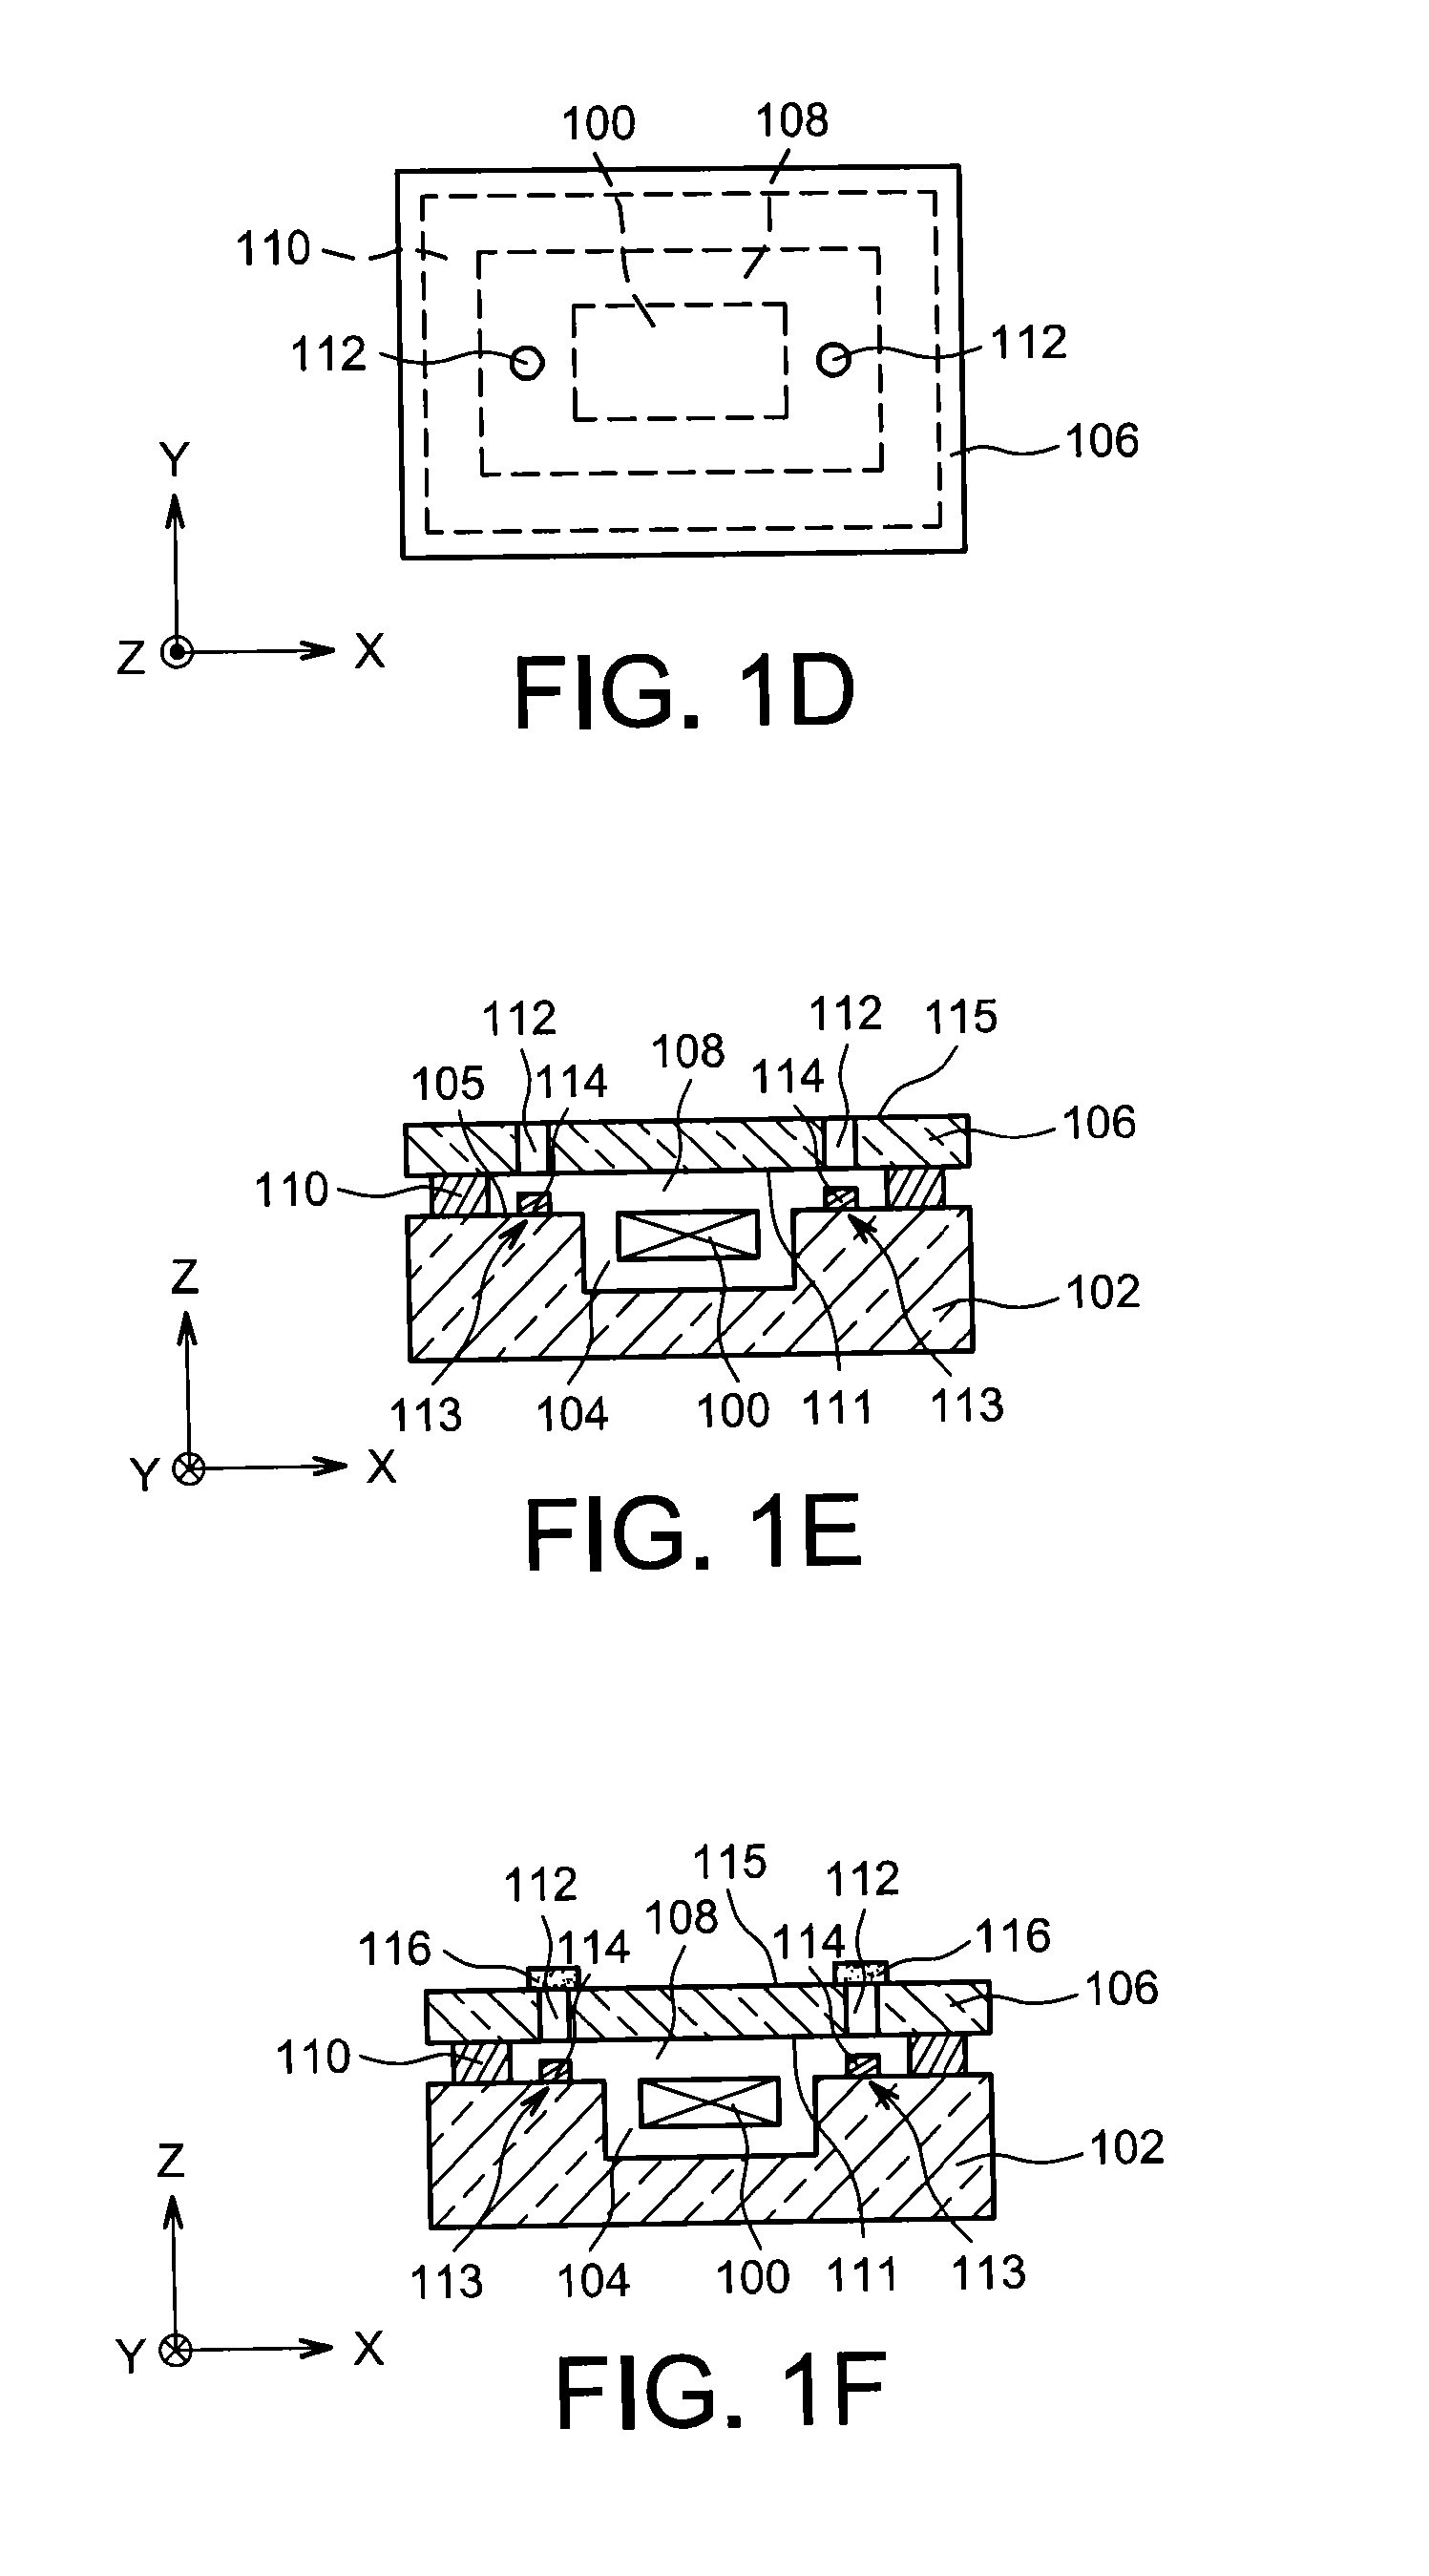 Process for encapsulating a micro-device by attaching a cap and depositing getter through the cap